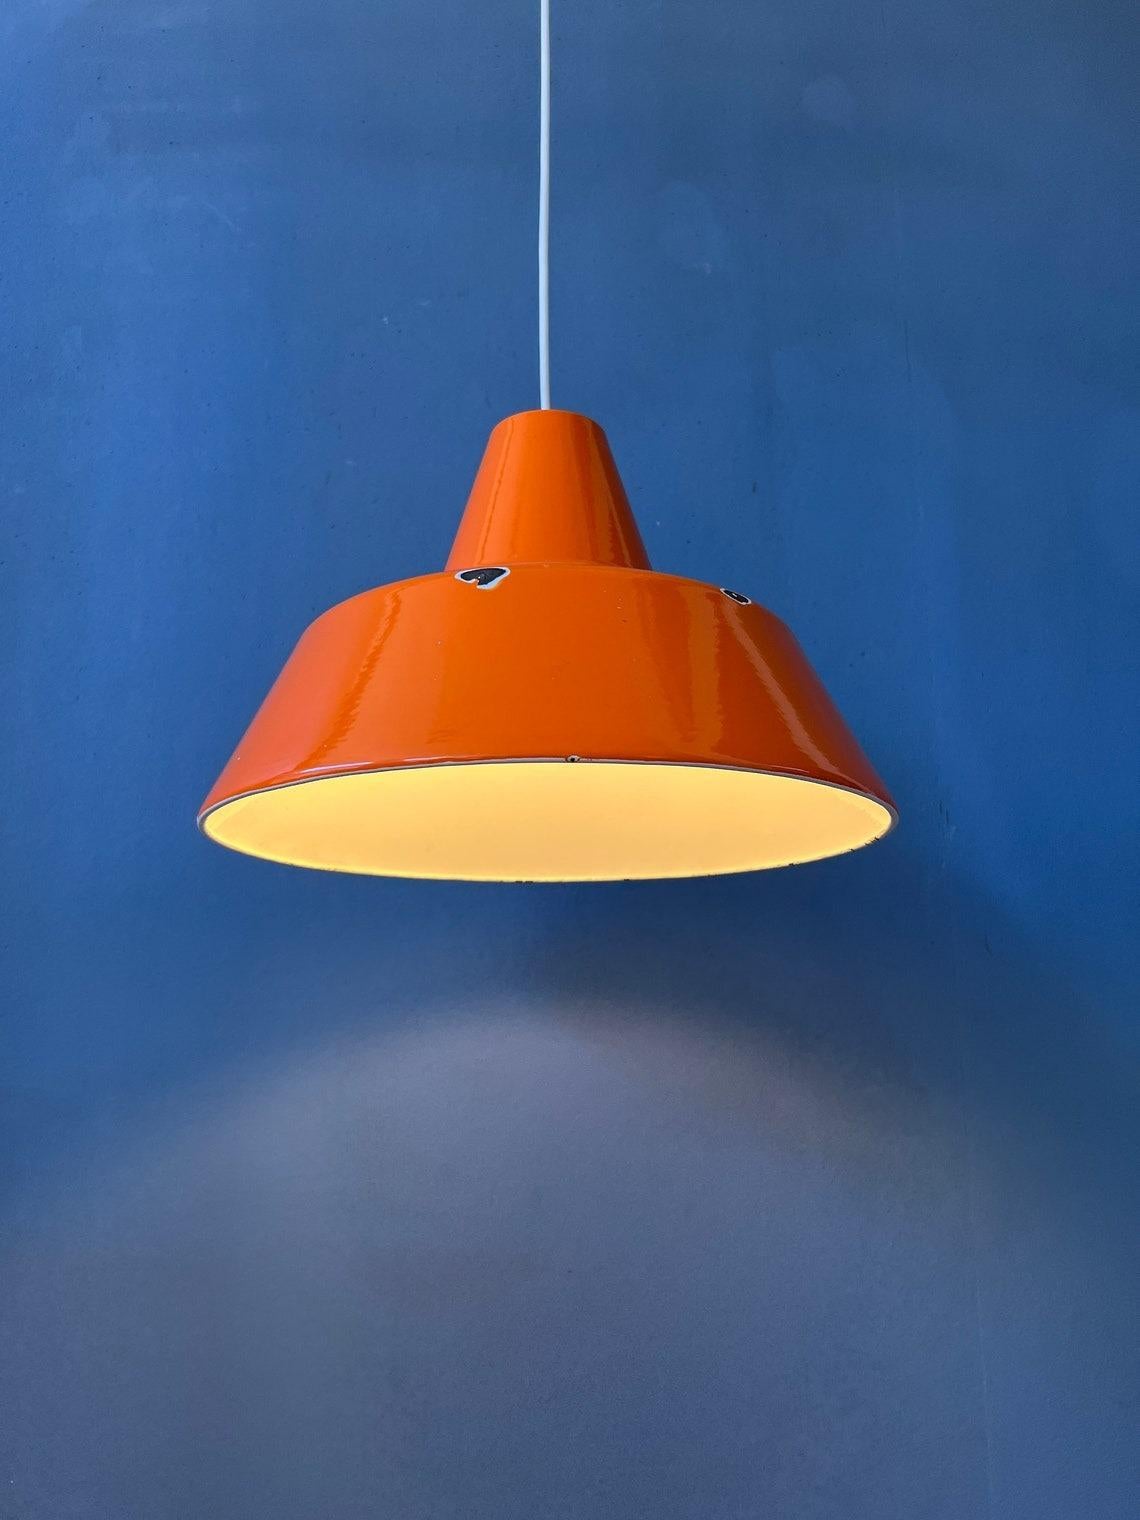 Classic industrial orange pendant lamp in the style of Louis Poulsen (not marked). The lamp is made out of steel and has a thick orange lacquer. The lamp requires one E27/26 (standard) lightbulb. Please don't hesitate to get in touch if you have any